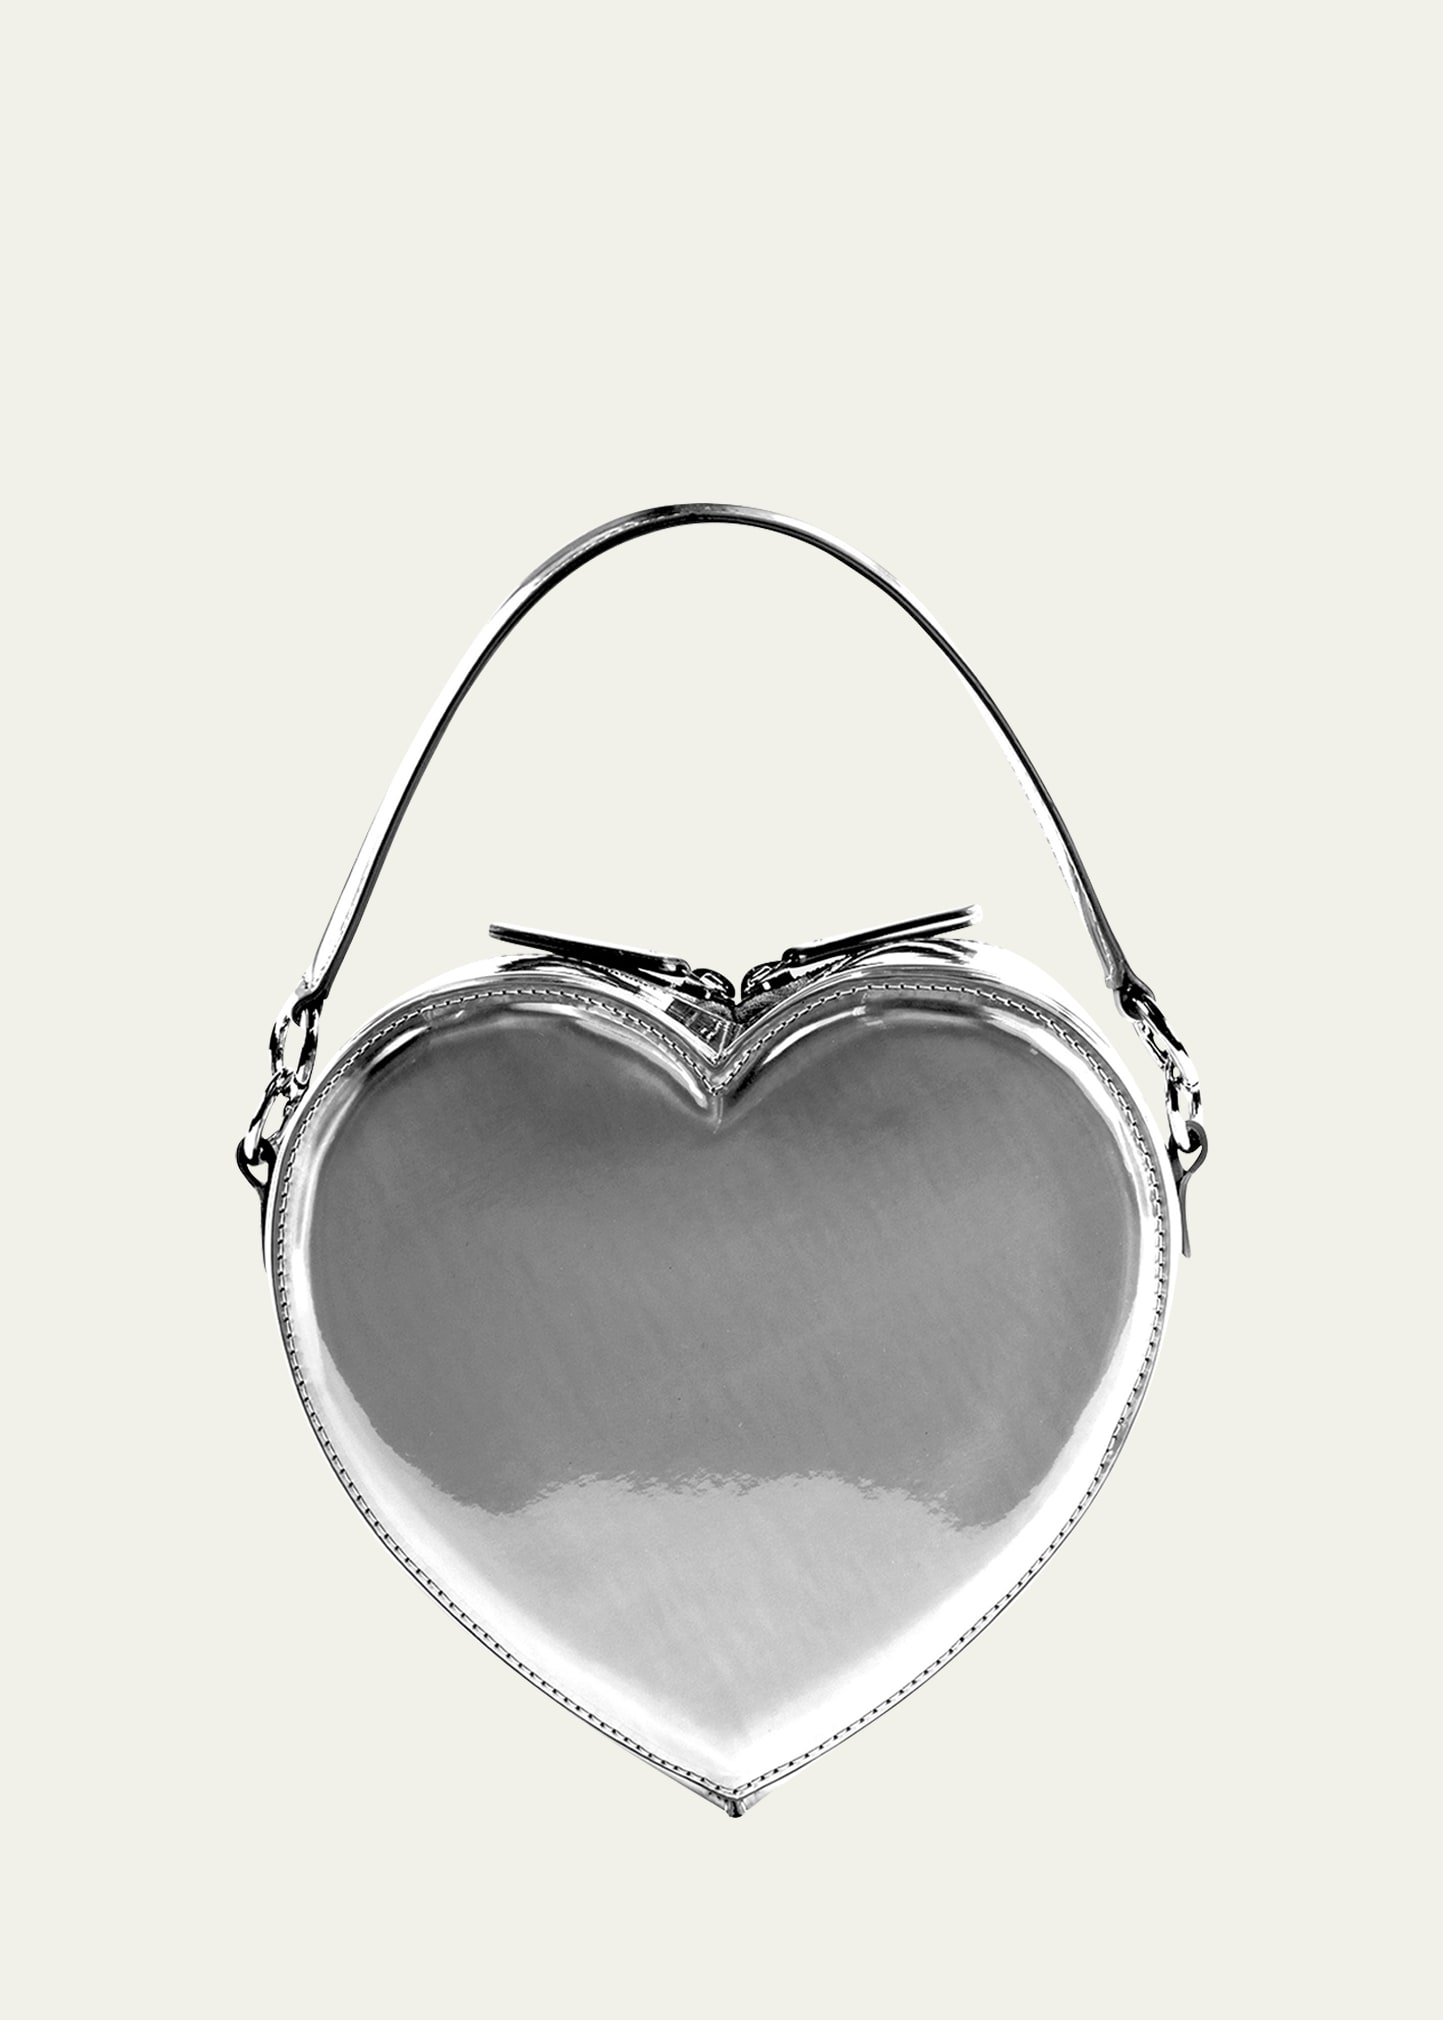 Liselle Kiss Harley Heart Metallic Faux-leather Top-handle Bag In Silver Mirror